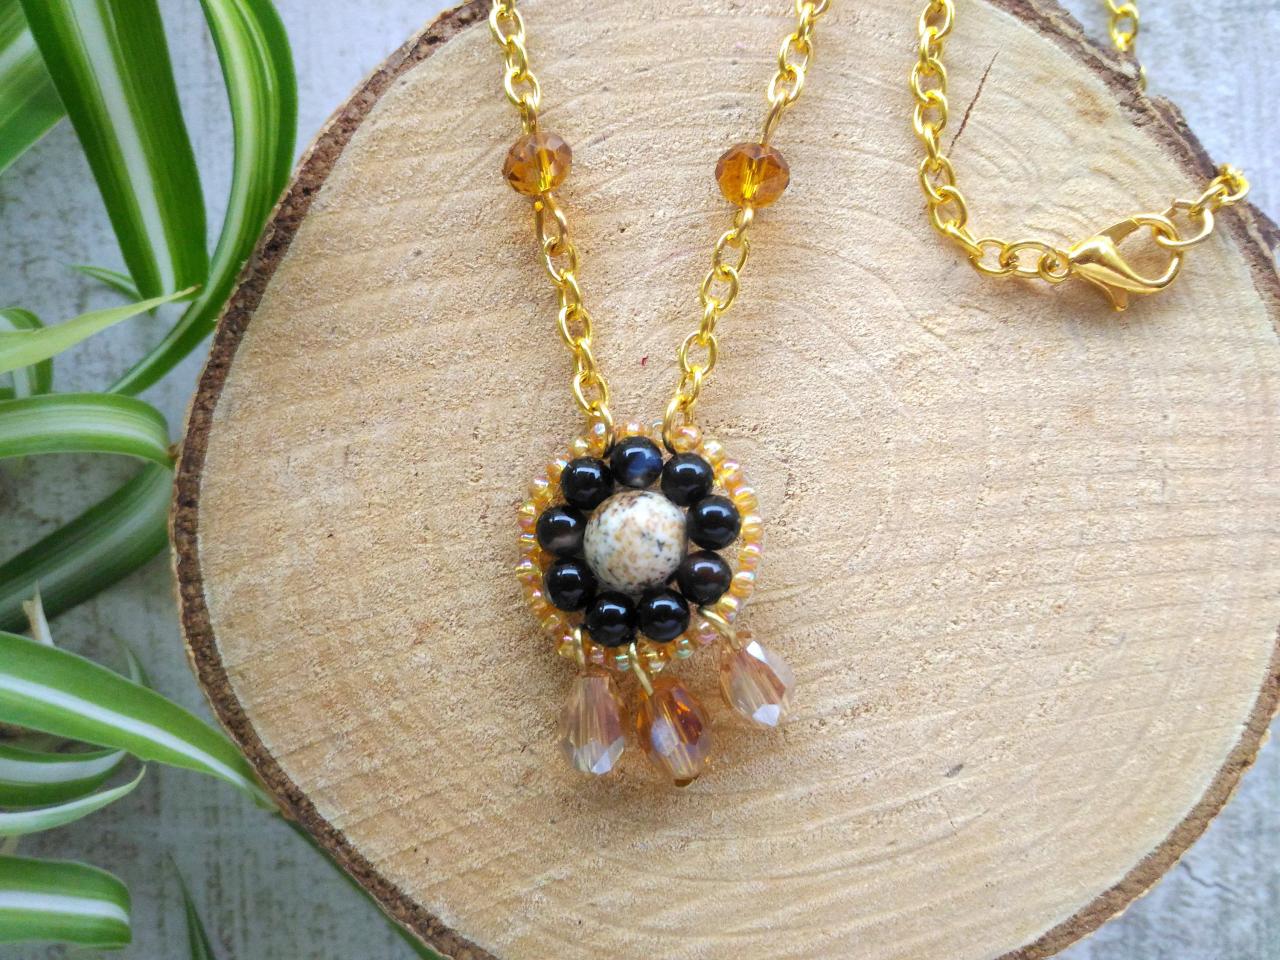 Brown Gold Boho Necklace, Picture Jasper And Agate Short Chain Necklace, Bohemian Beaded Pendant, Gypsy Style Necklace, Bead Woven Pendant